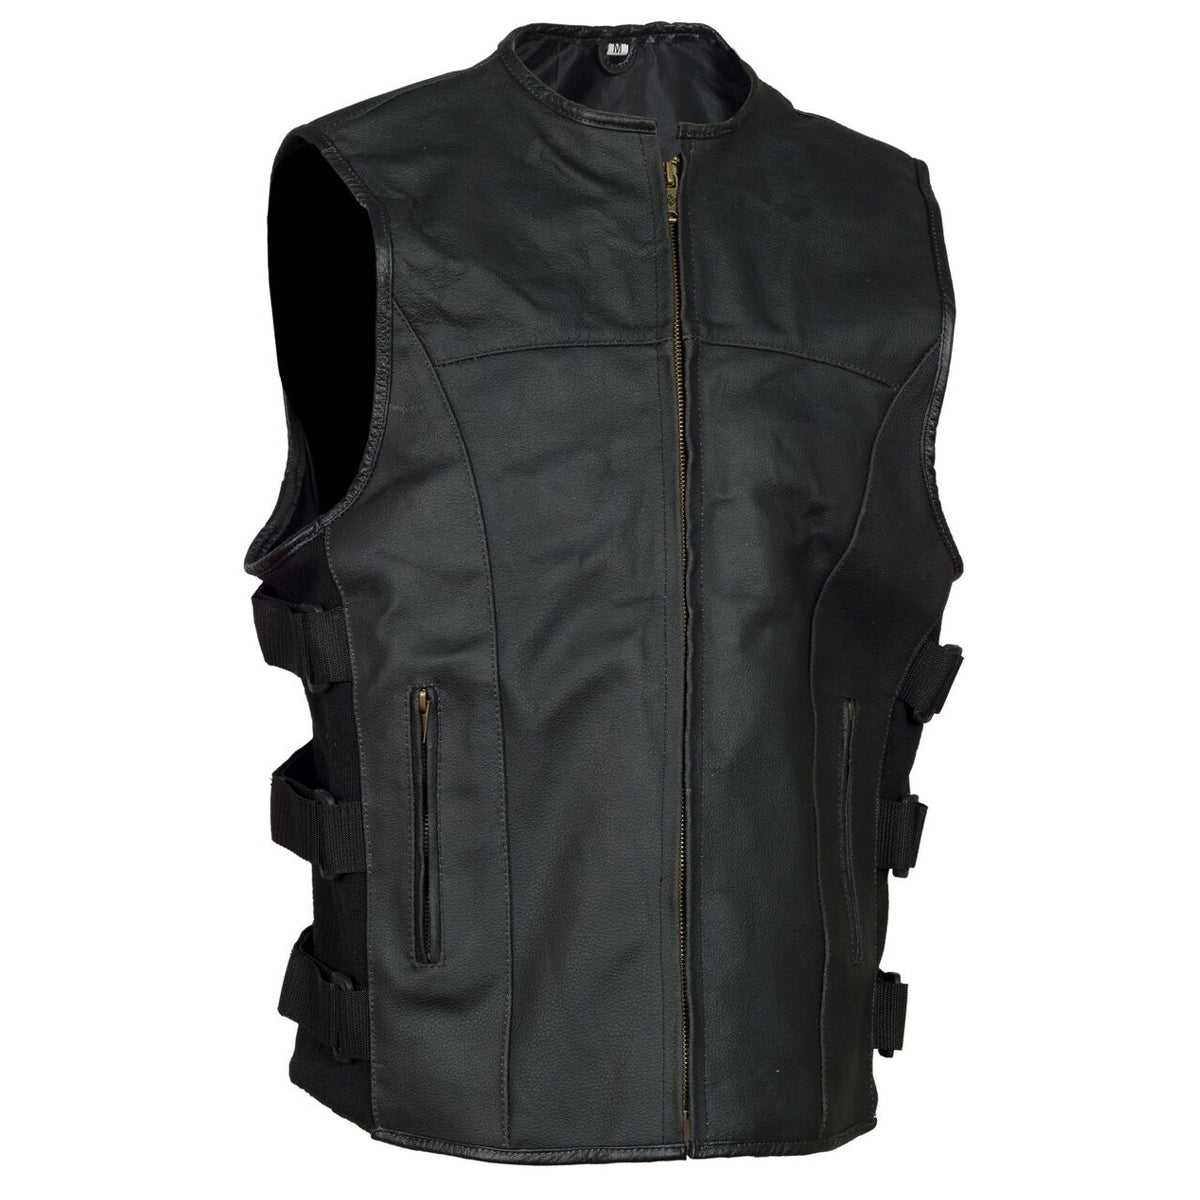 Mens Swat Style Motorcycle Biker Leather Vest With Two Concealed Gun Pockets - High Quality Leather Jackets For Sale | Dream Jackets On Jackethunt